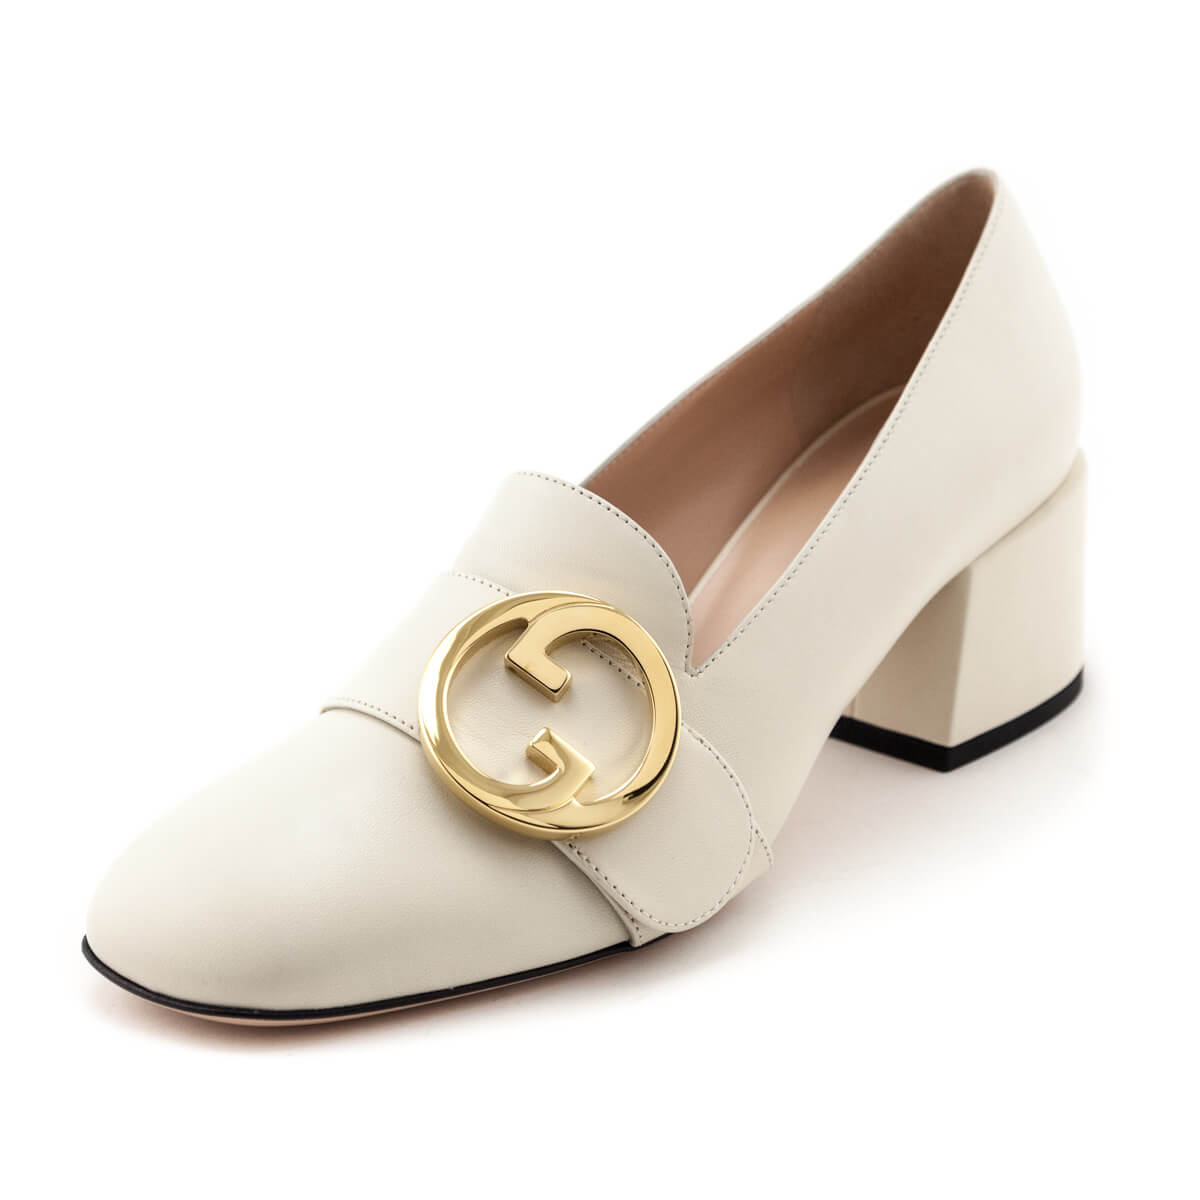 Gucci Mystic White Blondie GG Mid-Heel Pumps Size US 8 | EU 38 - Love that Bag etc - Preowned Authentic Designer Handbags & Preloved Fashions